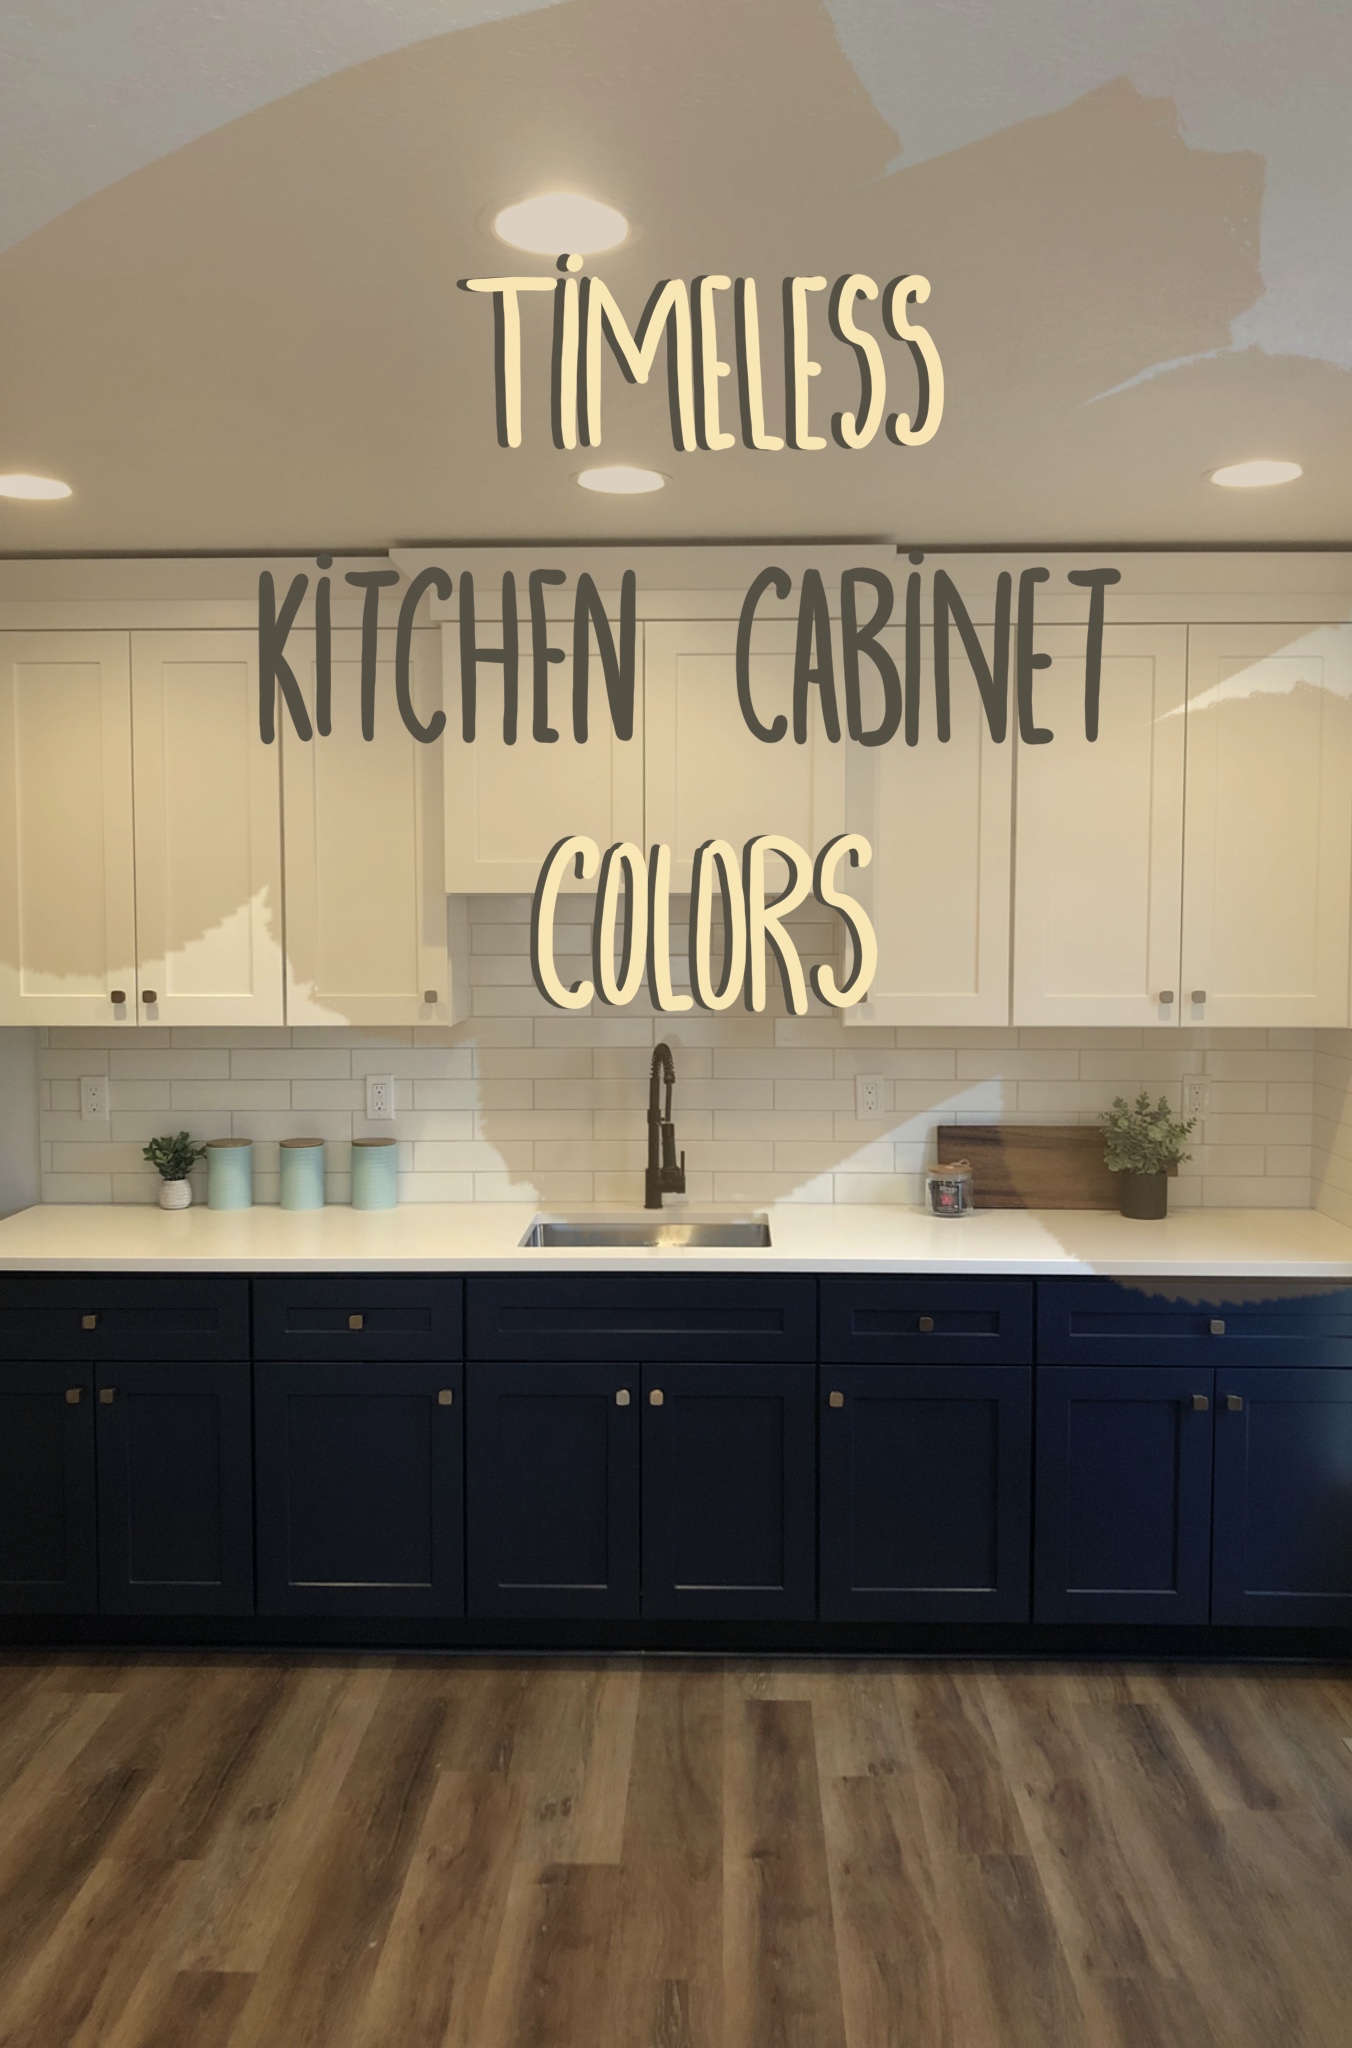 image of a kitchen titled timeless kitchen cabinet colors